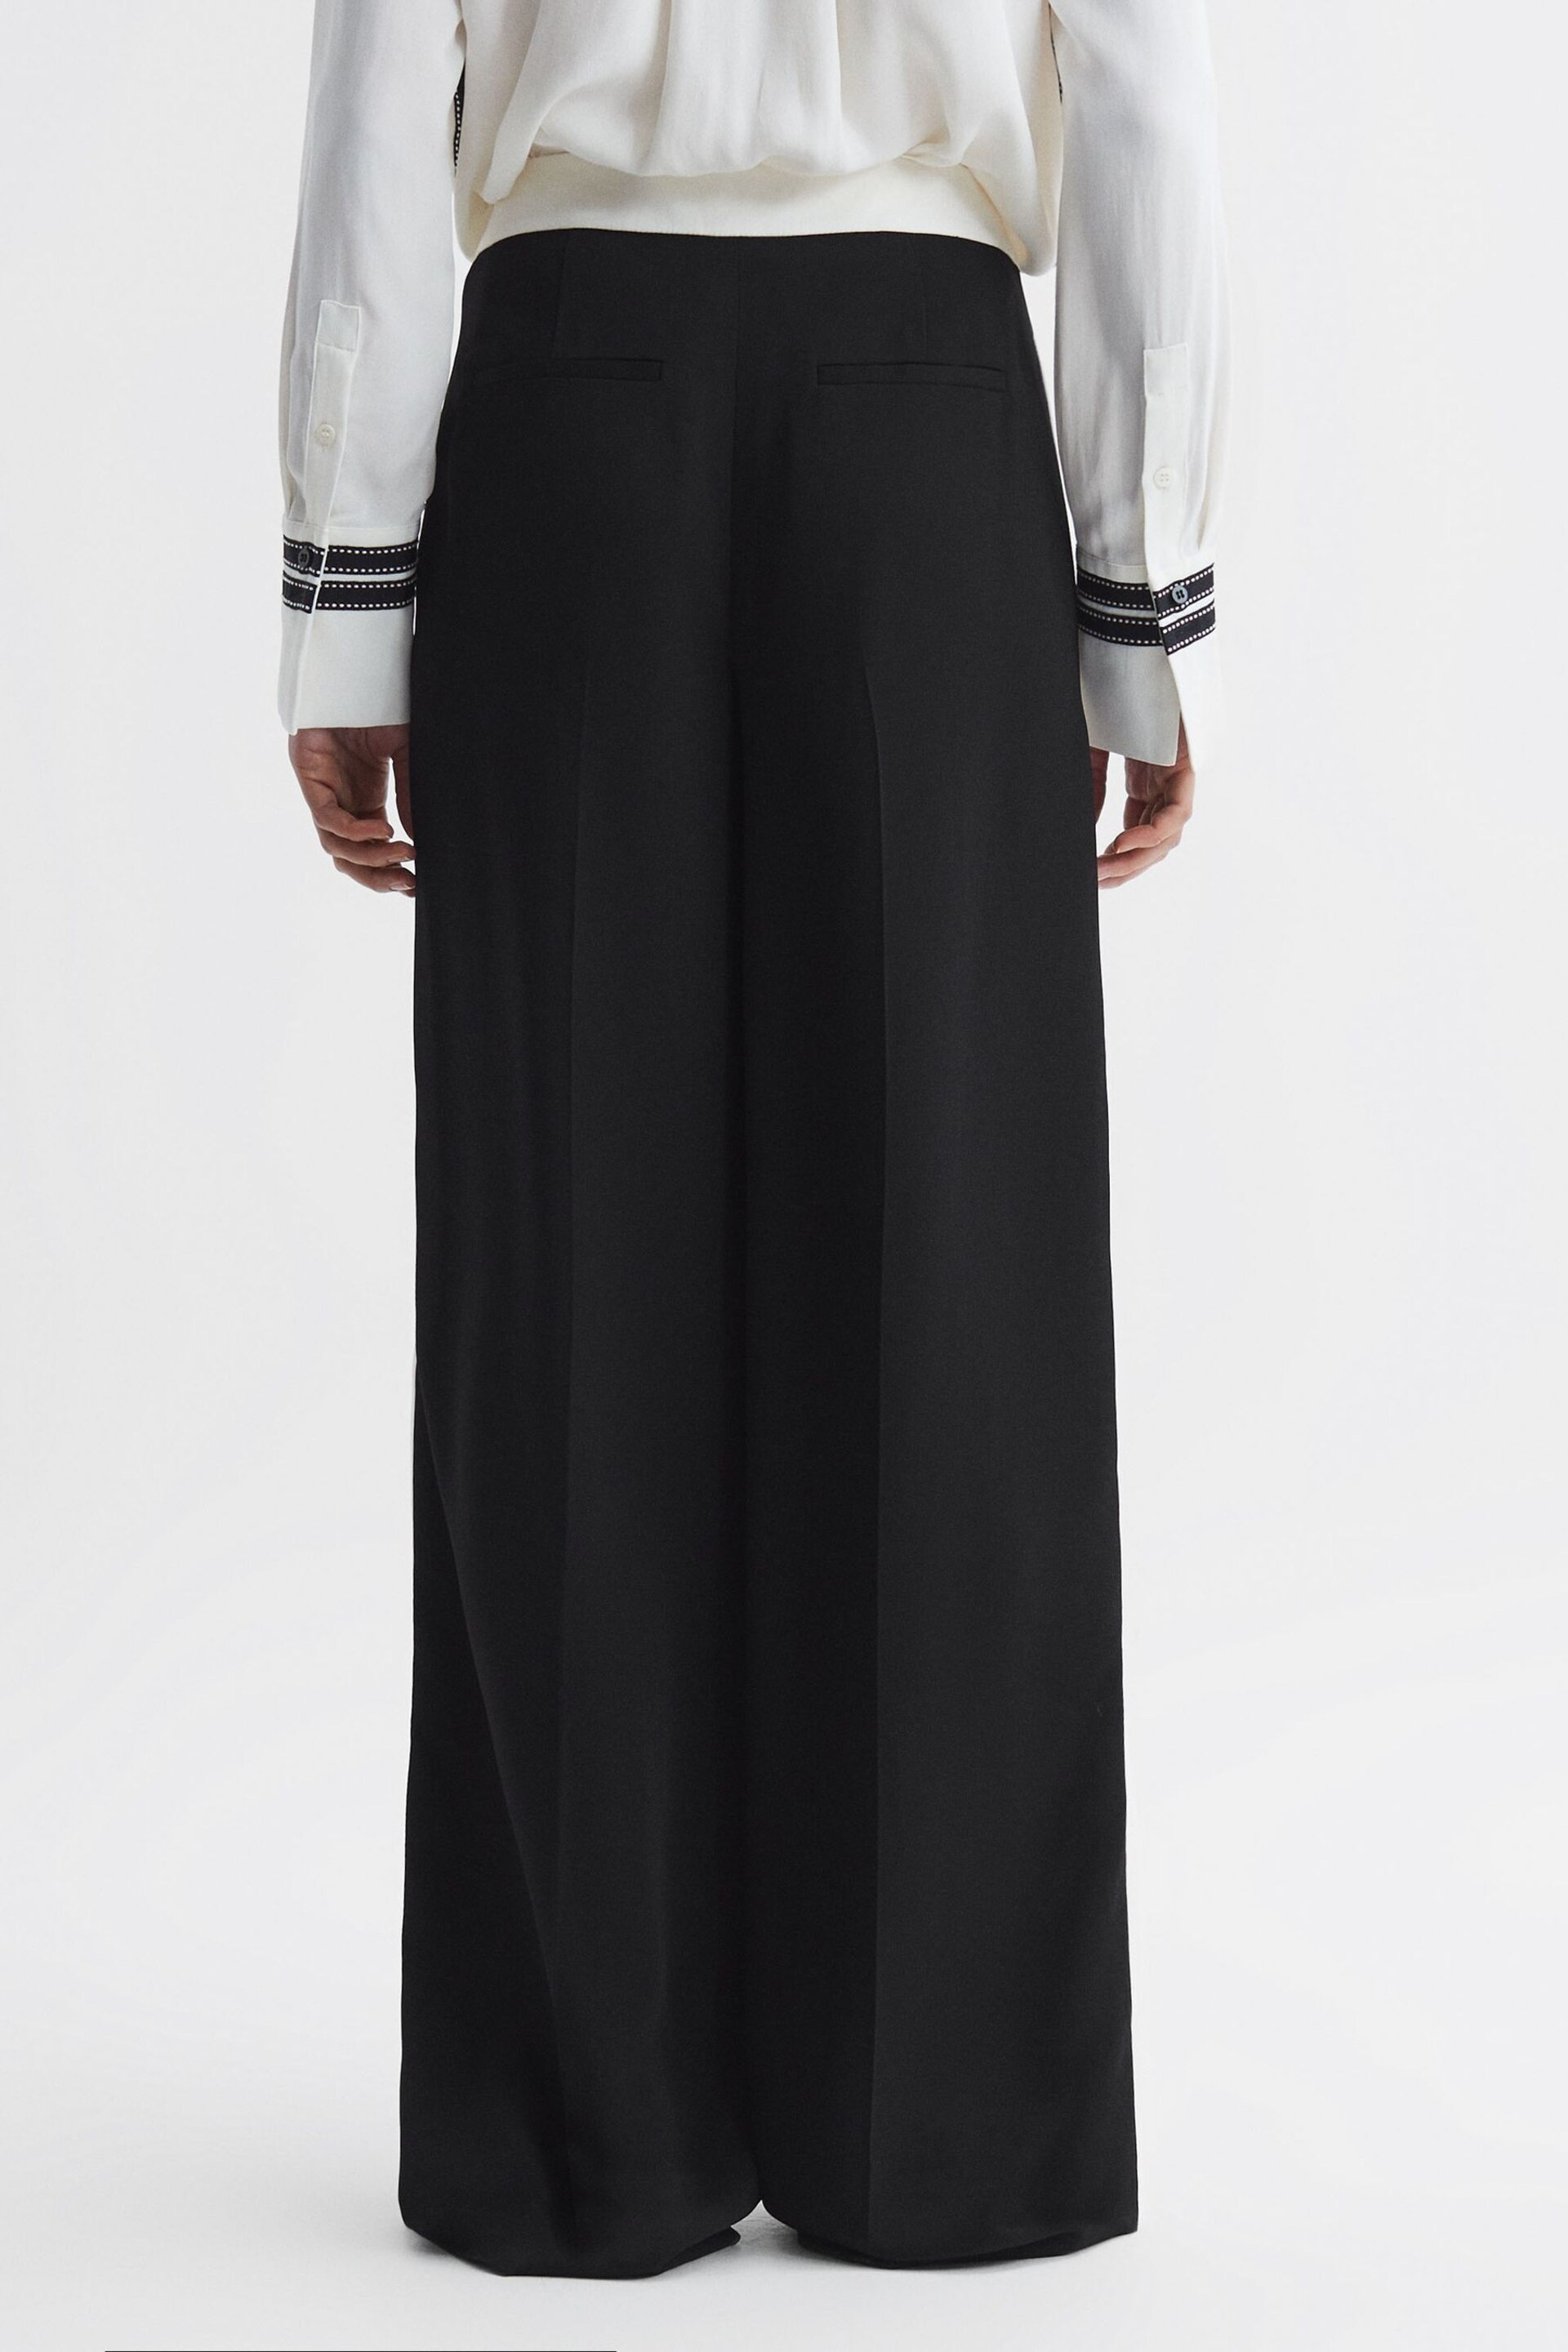 Reiss Black Bryn Contrast Waistband Pintuck Trousers - Image 5 of 6